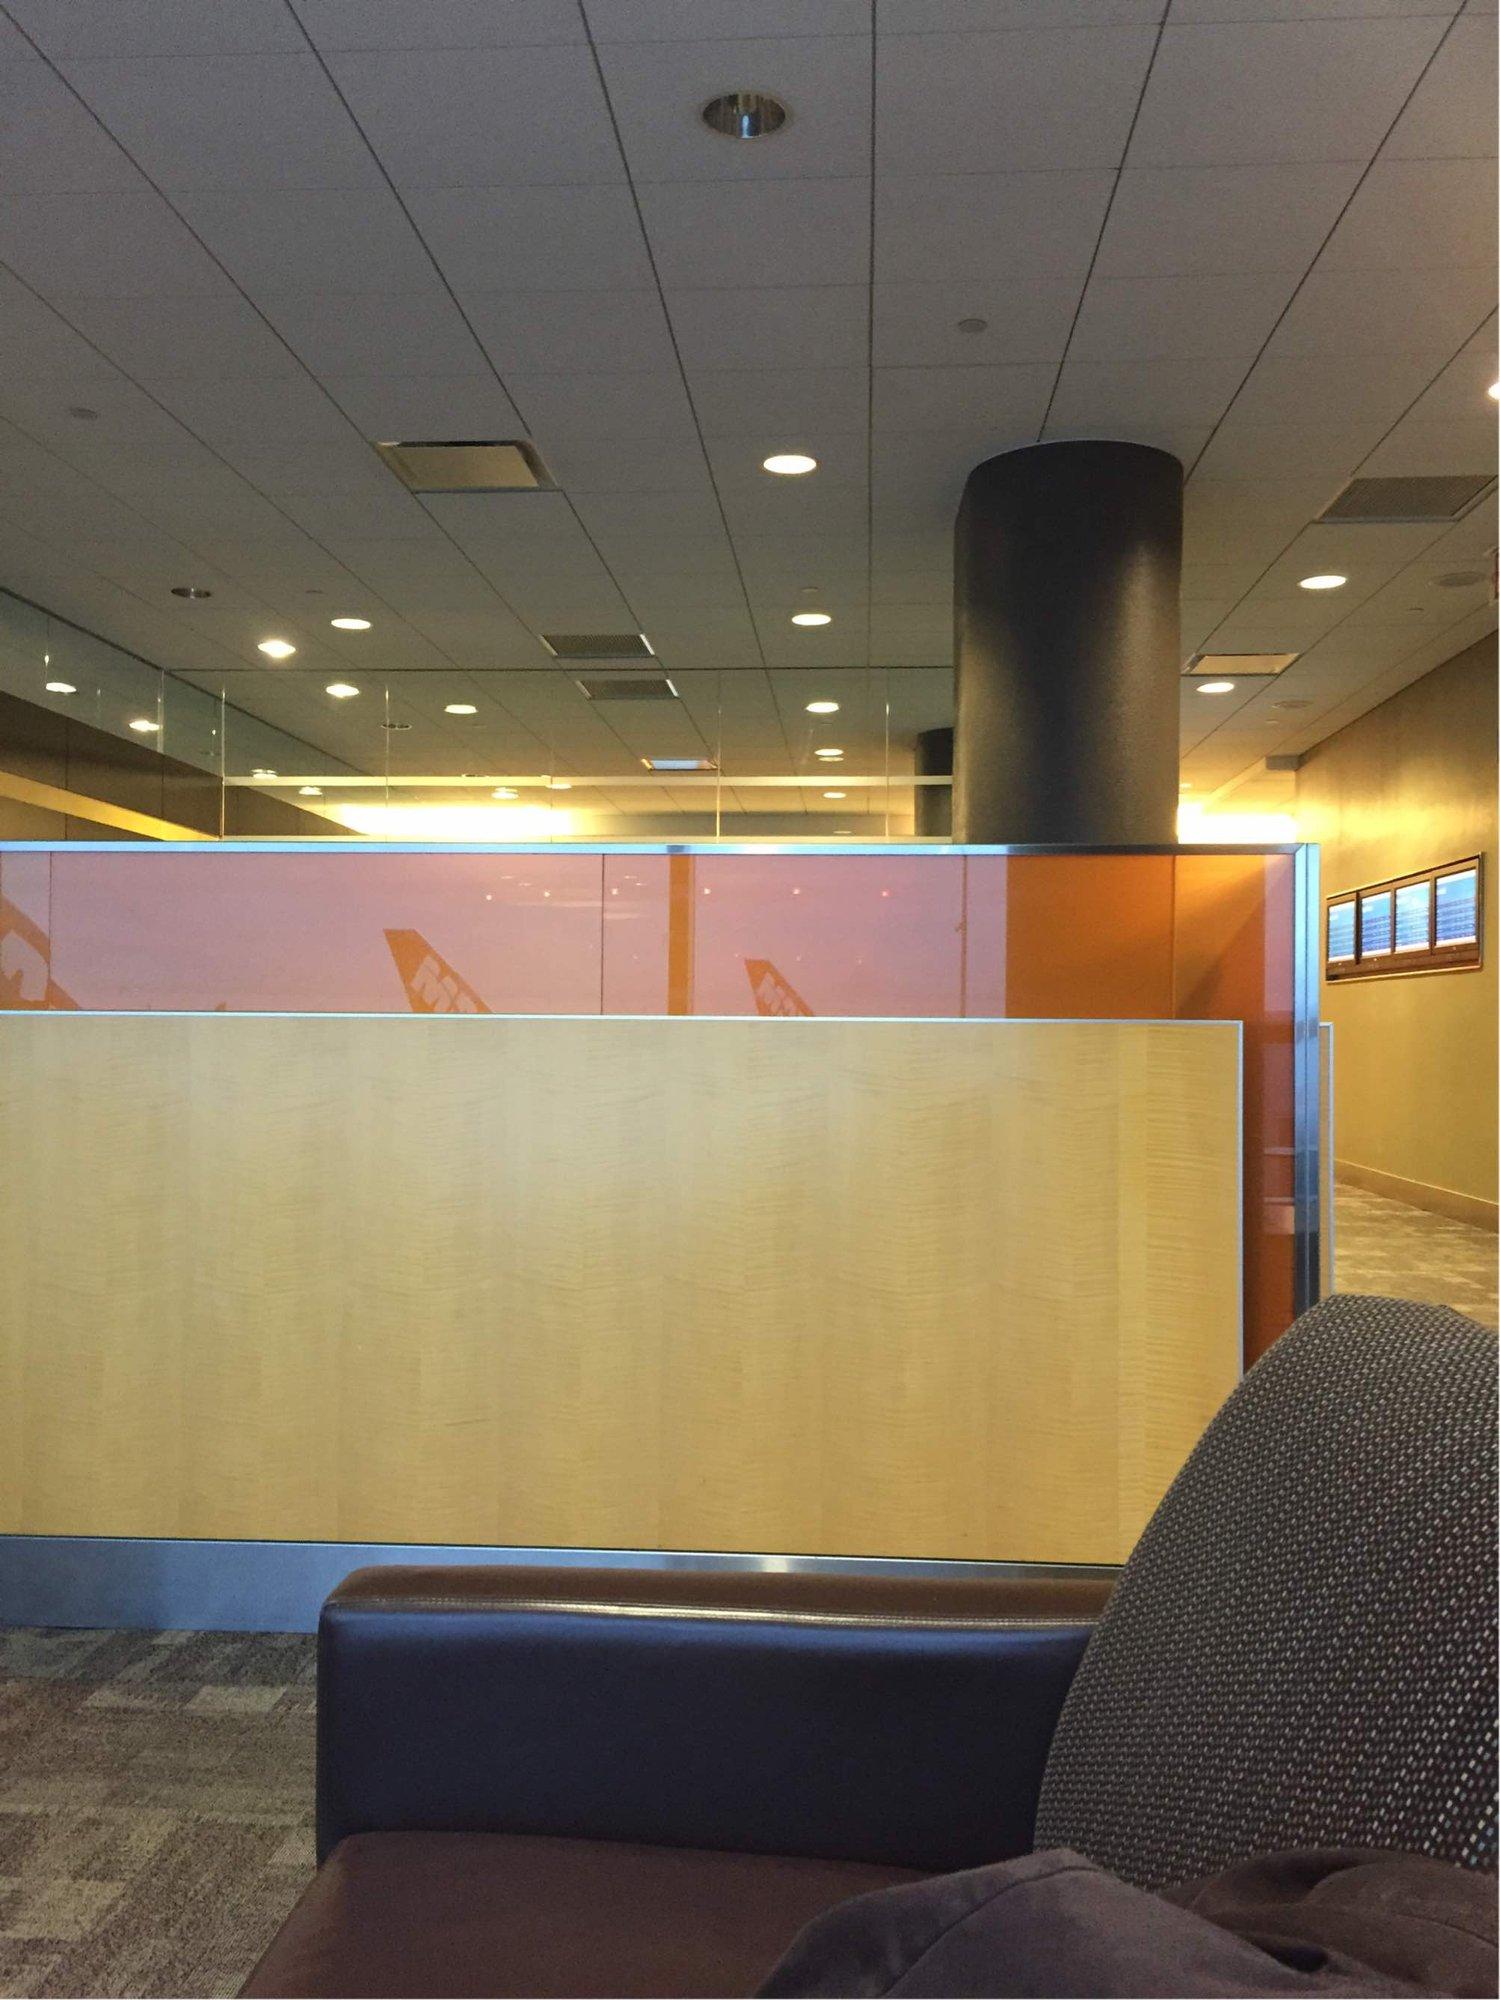 American Airlines Admirals Club image 23 of 25